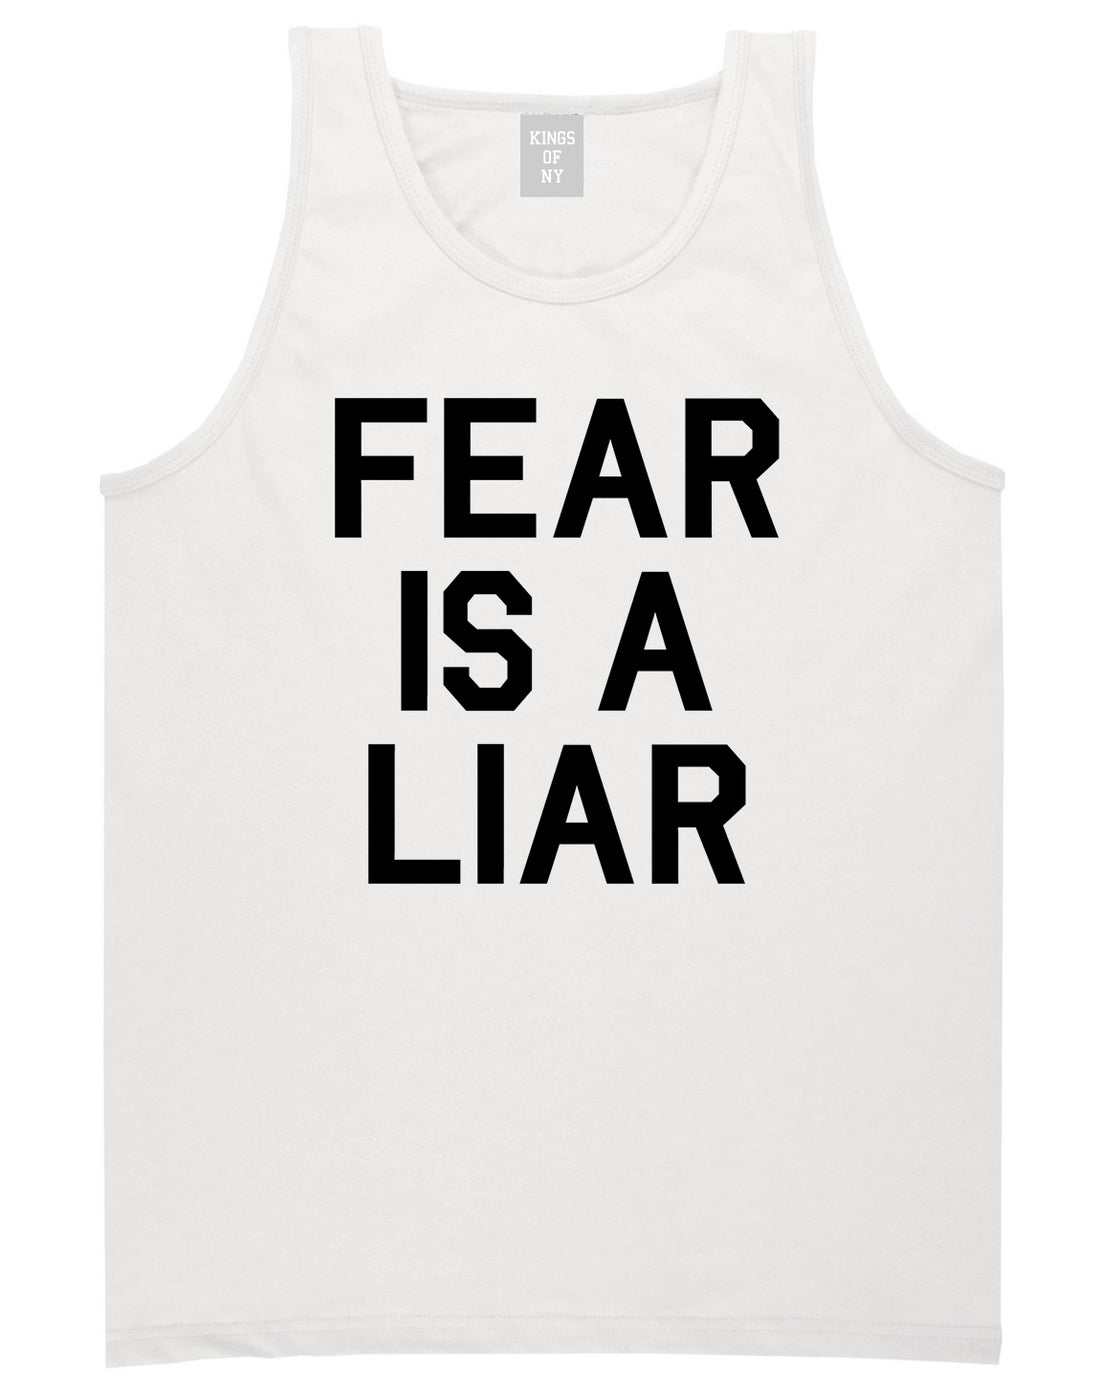 Fear Is A Liar Motivational Mens Tank Top Shirt White by Kings Of NY